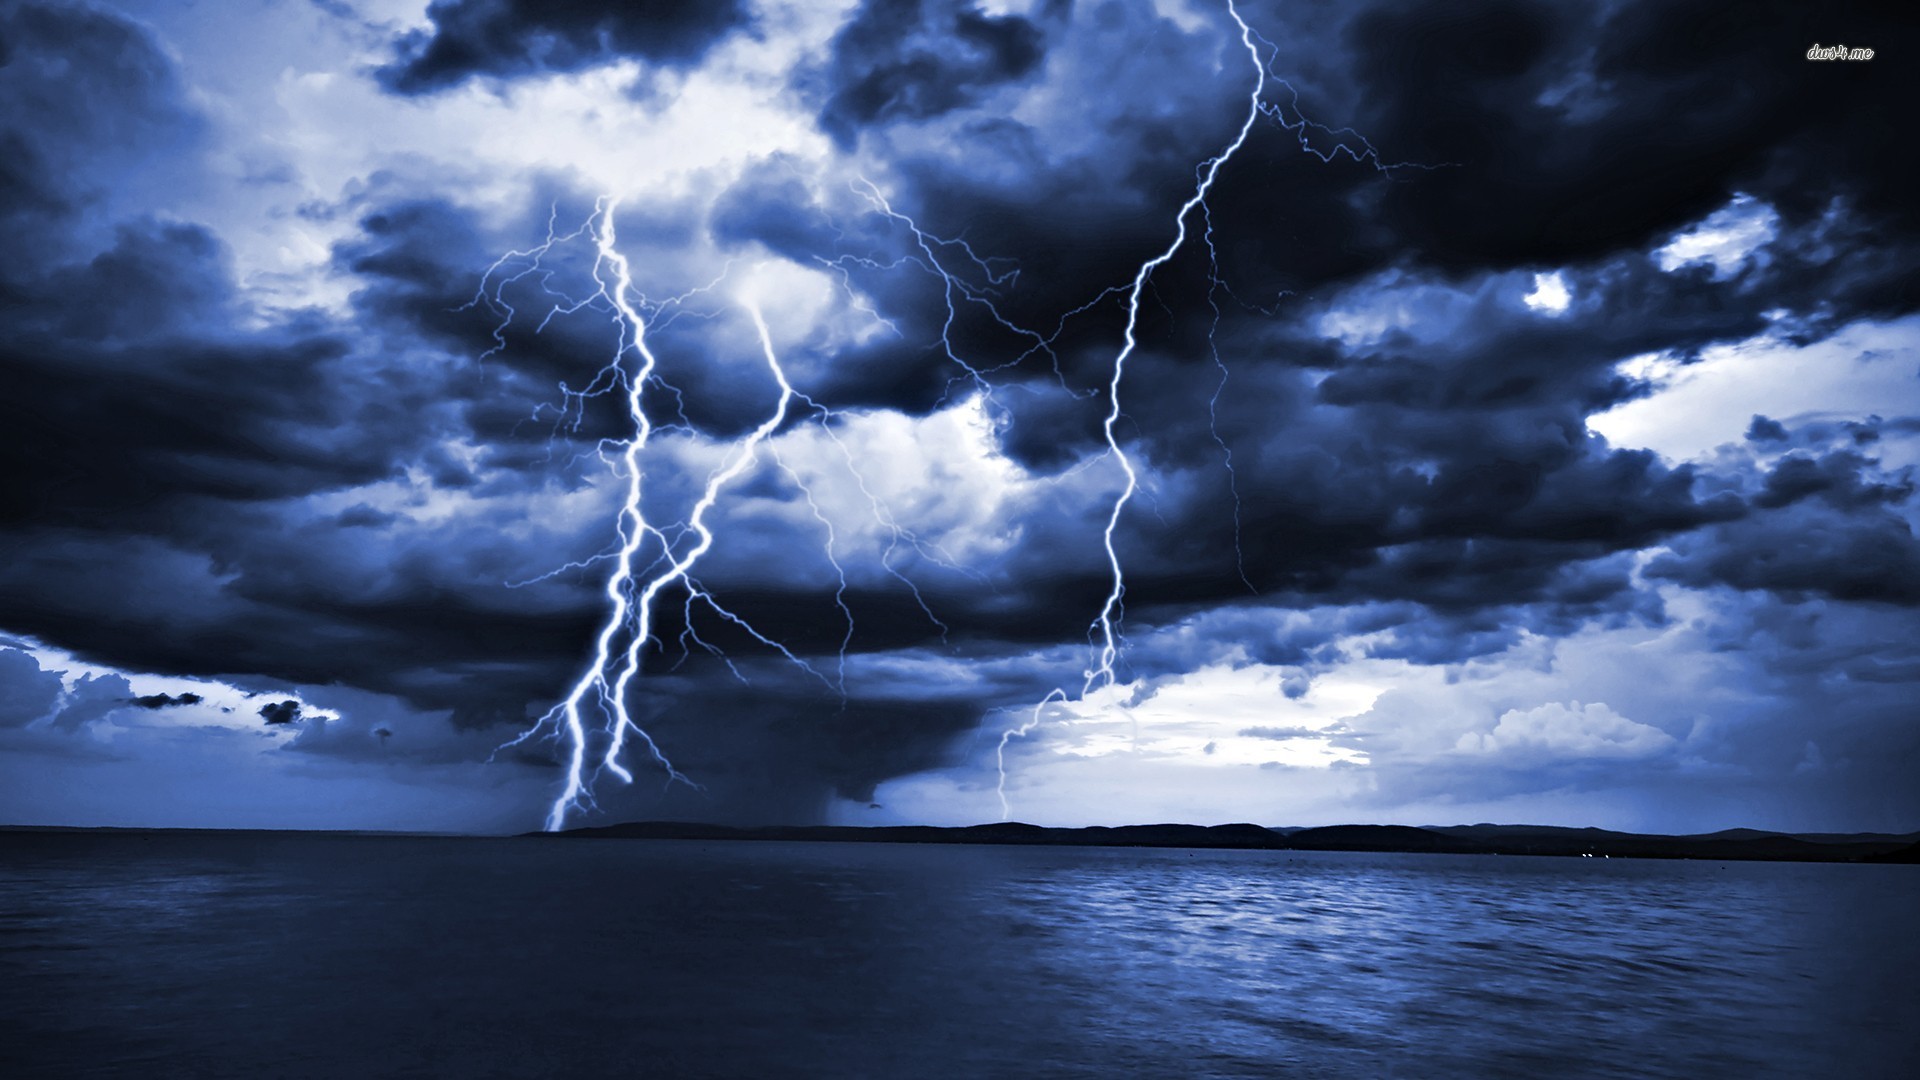 Download - Lightning Over The Sea , HD Wallpaper & Backgrounds